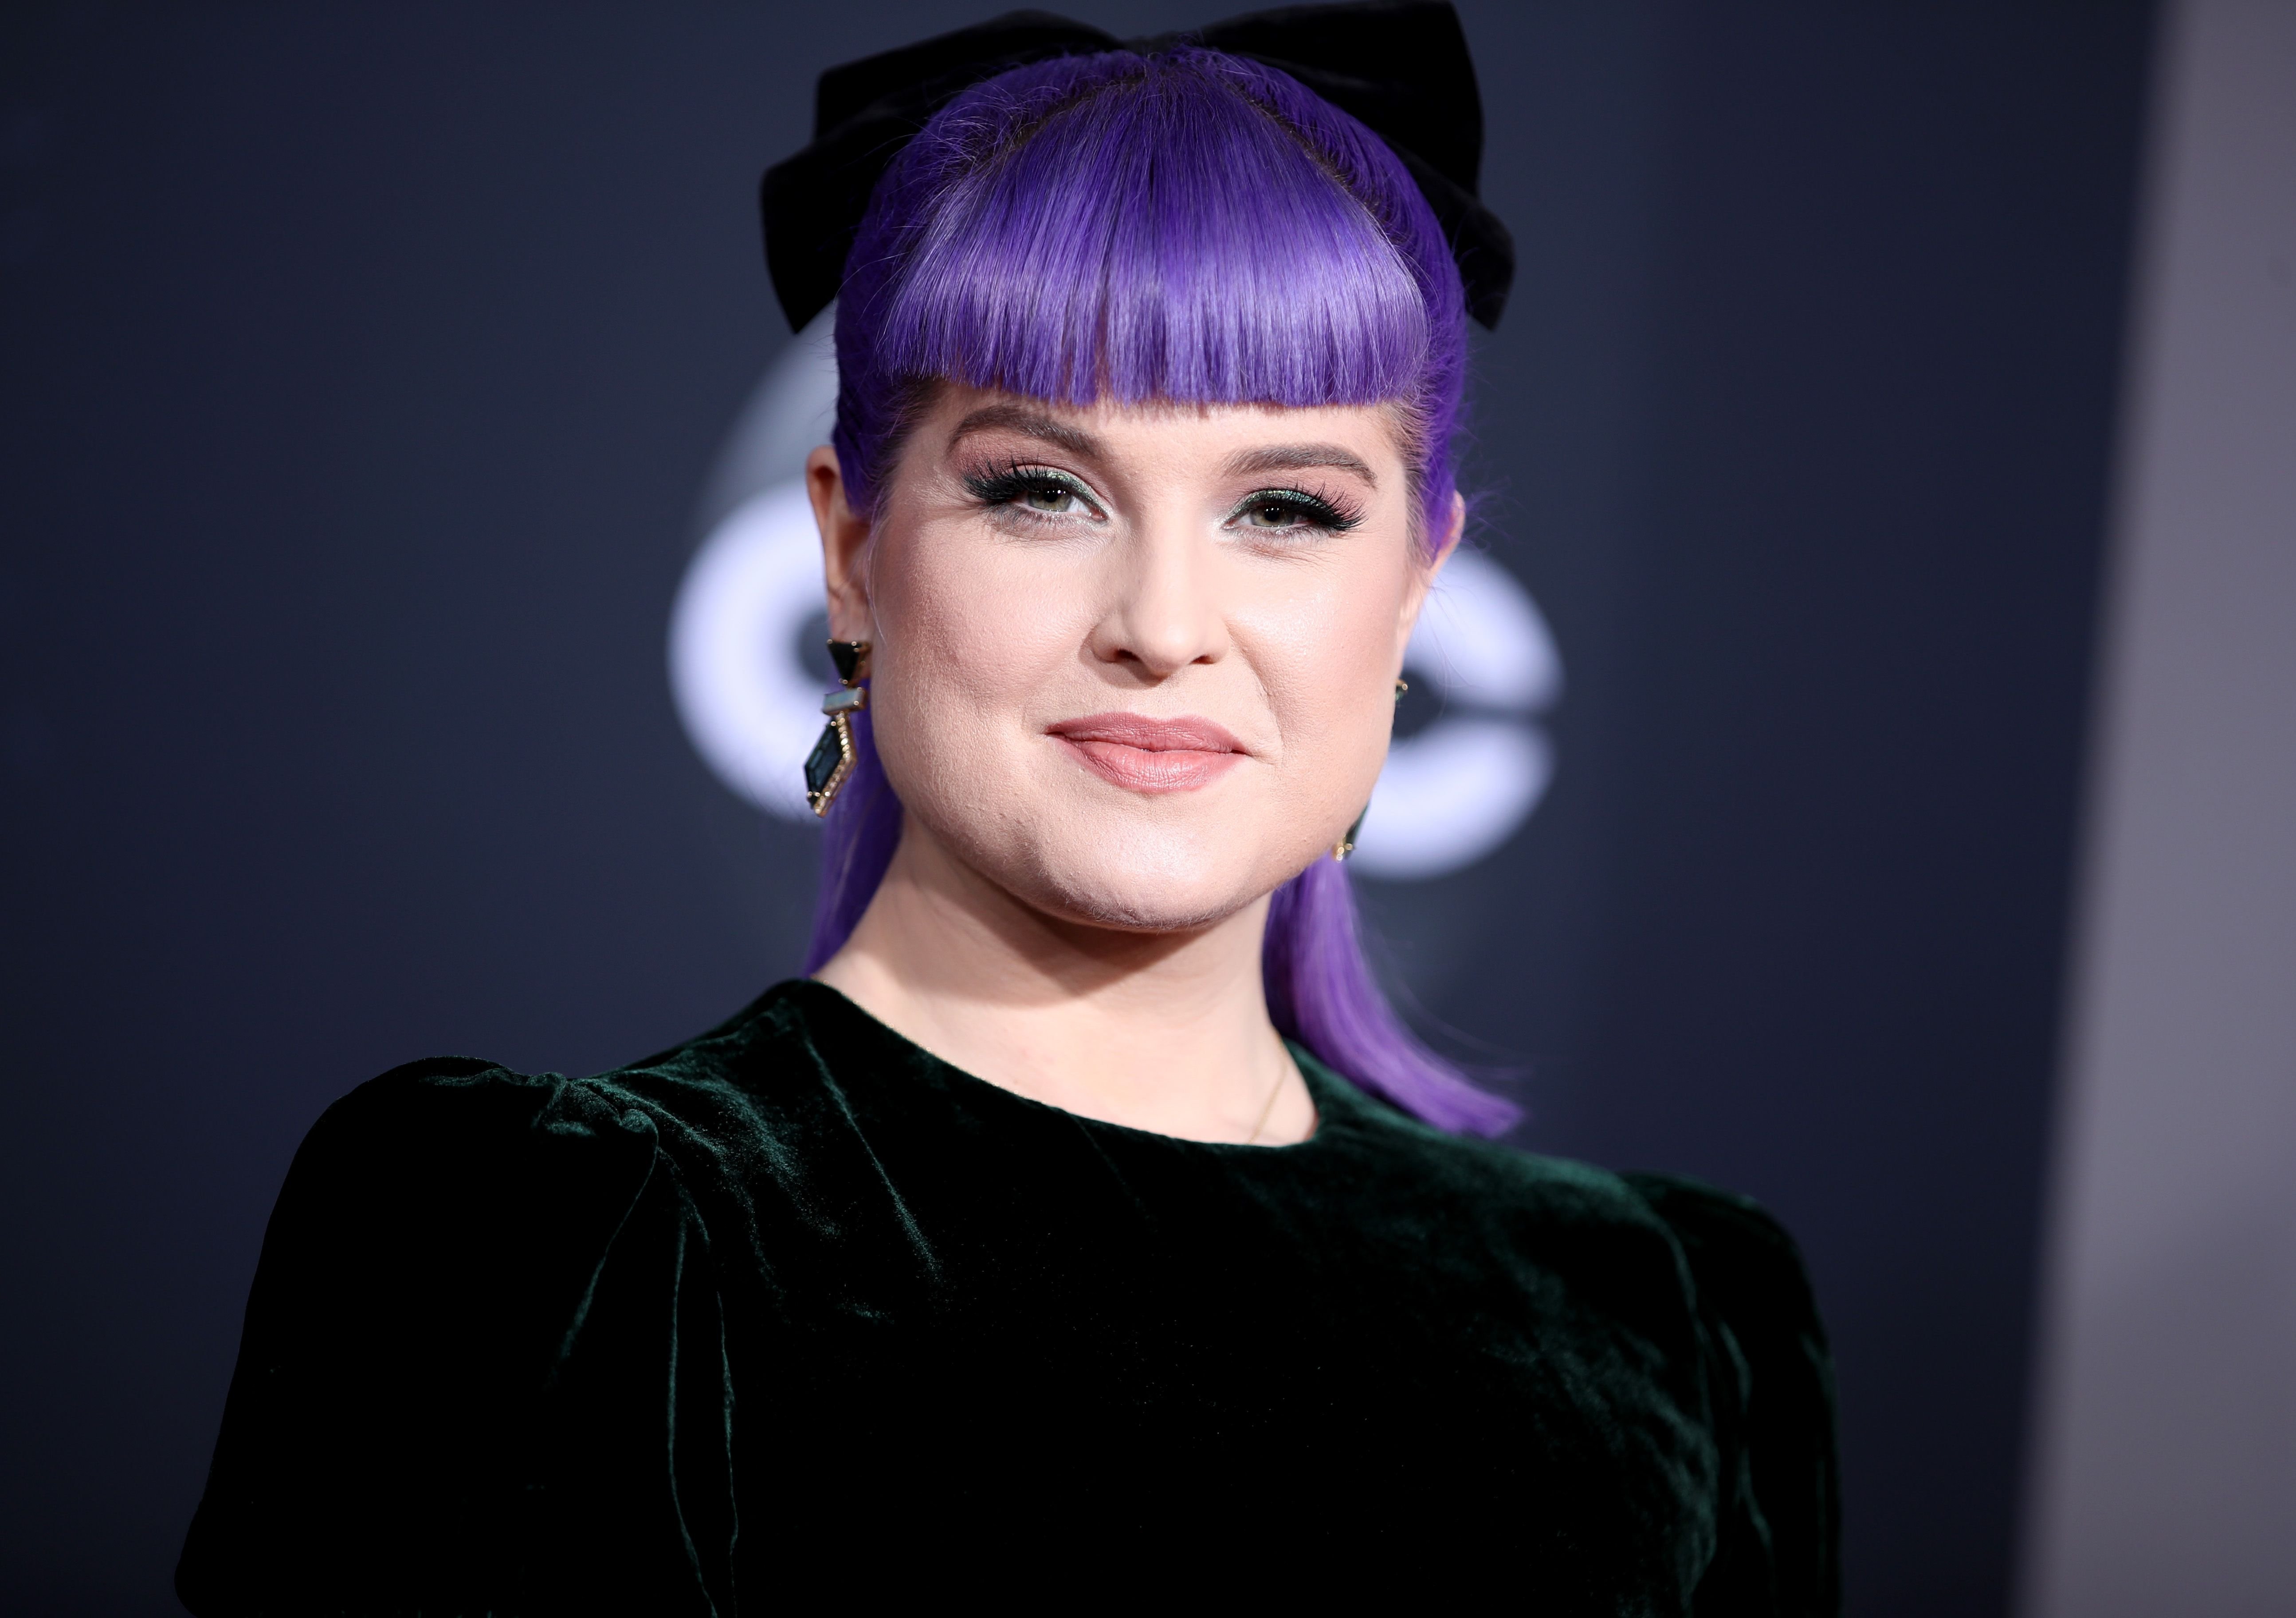 Kelly Osbourne at the 2019 American Music Awards at Microsoft Theater on November 24, 2019 | Photo: Getty Images